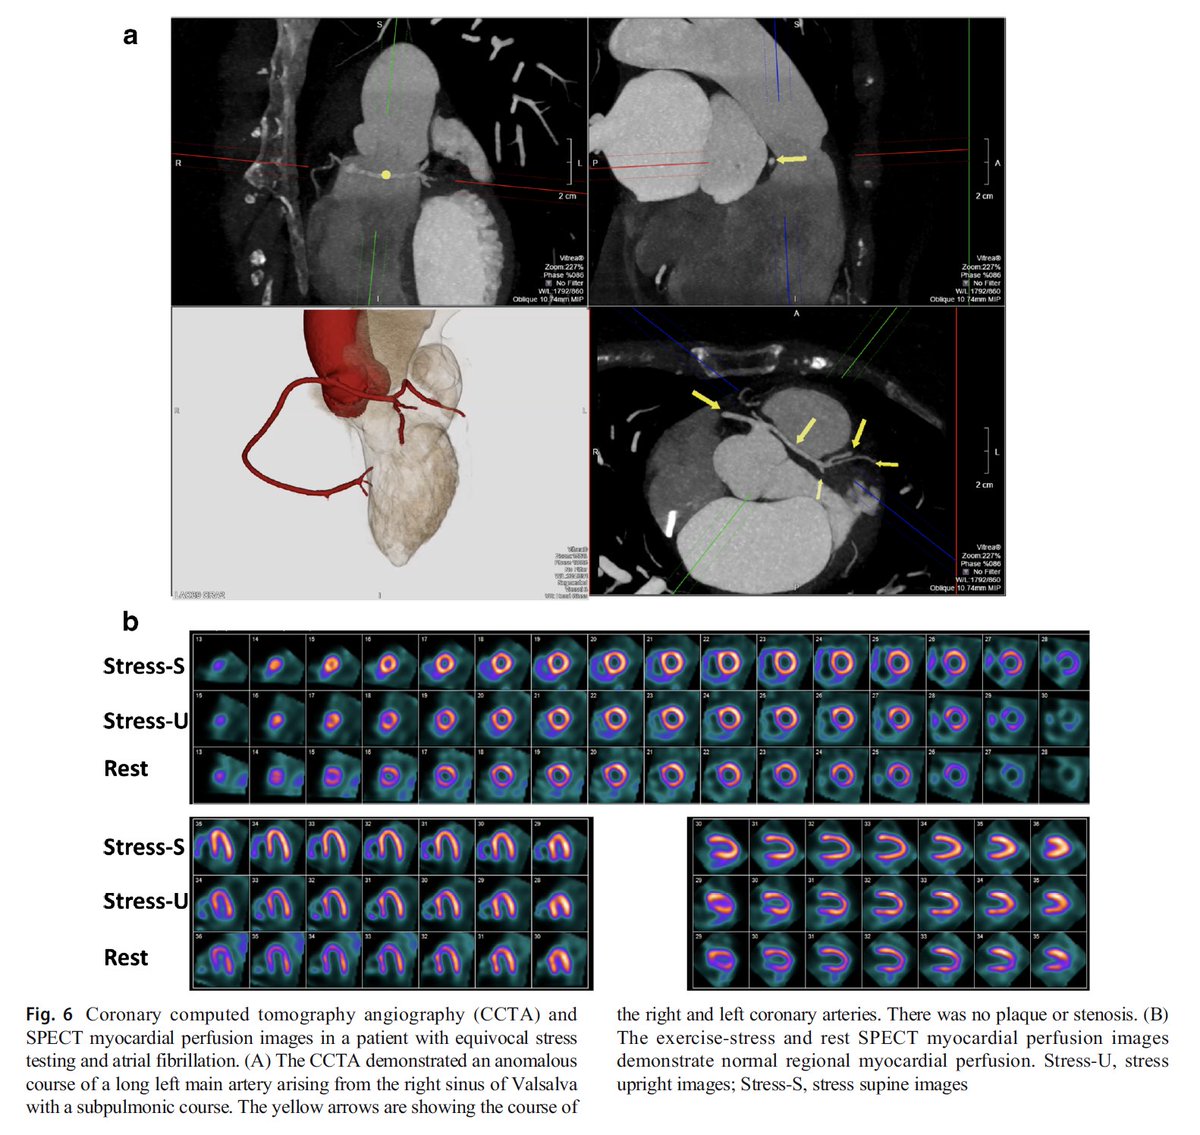 Excited to share our recent Case-Based Review on the clinical application of SPECT versus PET MPI in patients with equivocal CCTA. Thank you for your exceptional mentorship @mdicarli. @SpringerCurRpts @BrighamResearch @BWHCVImaging #cardiotwitter #multimodalityimaging